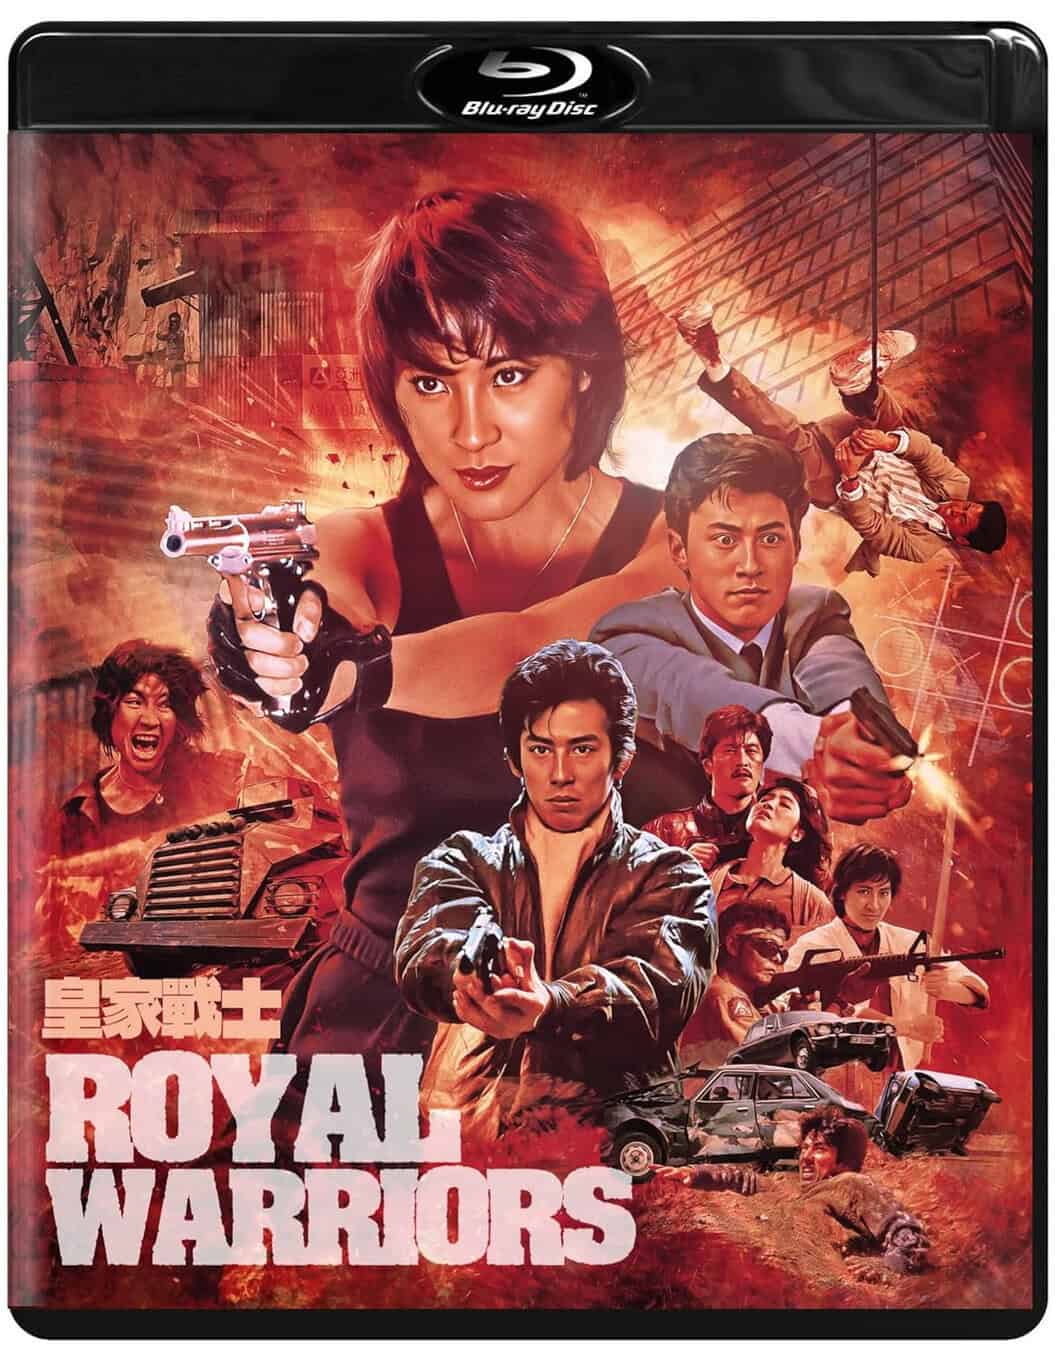 Blu-ray Review: Royal Warriors (Special Edition)